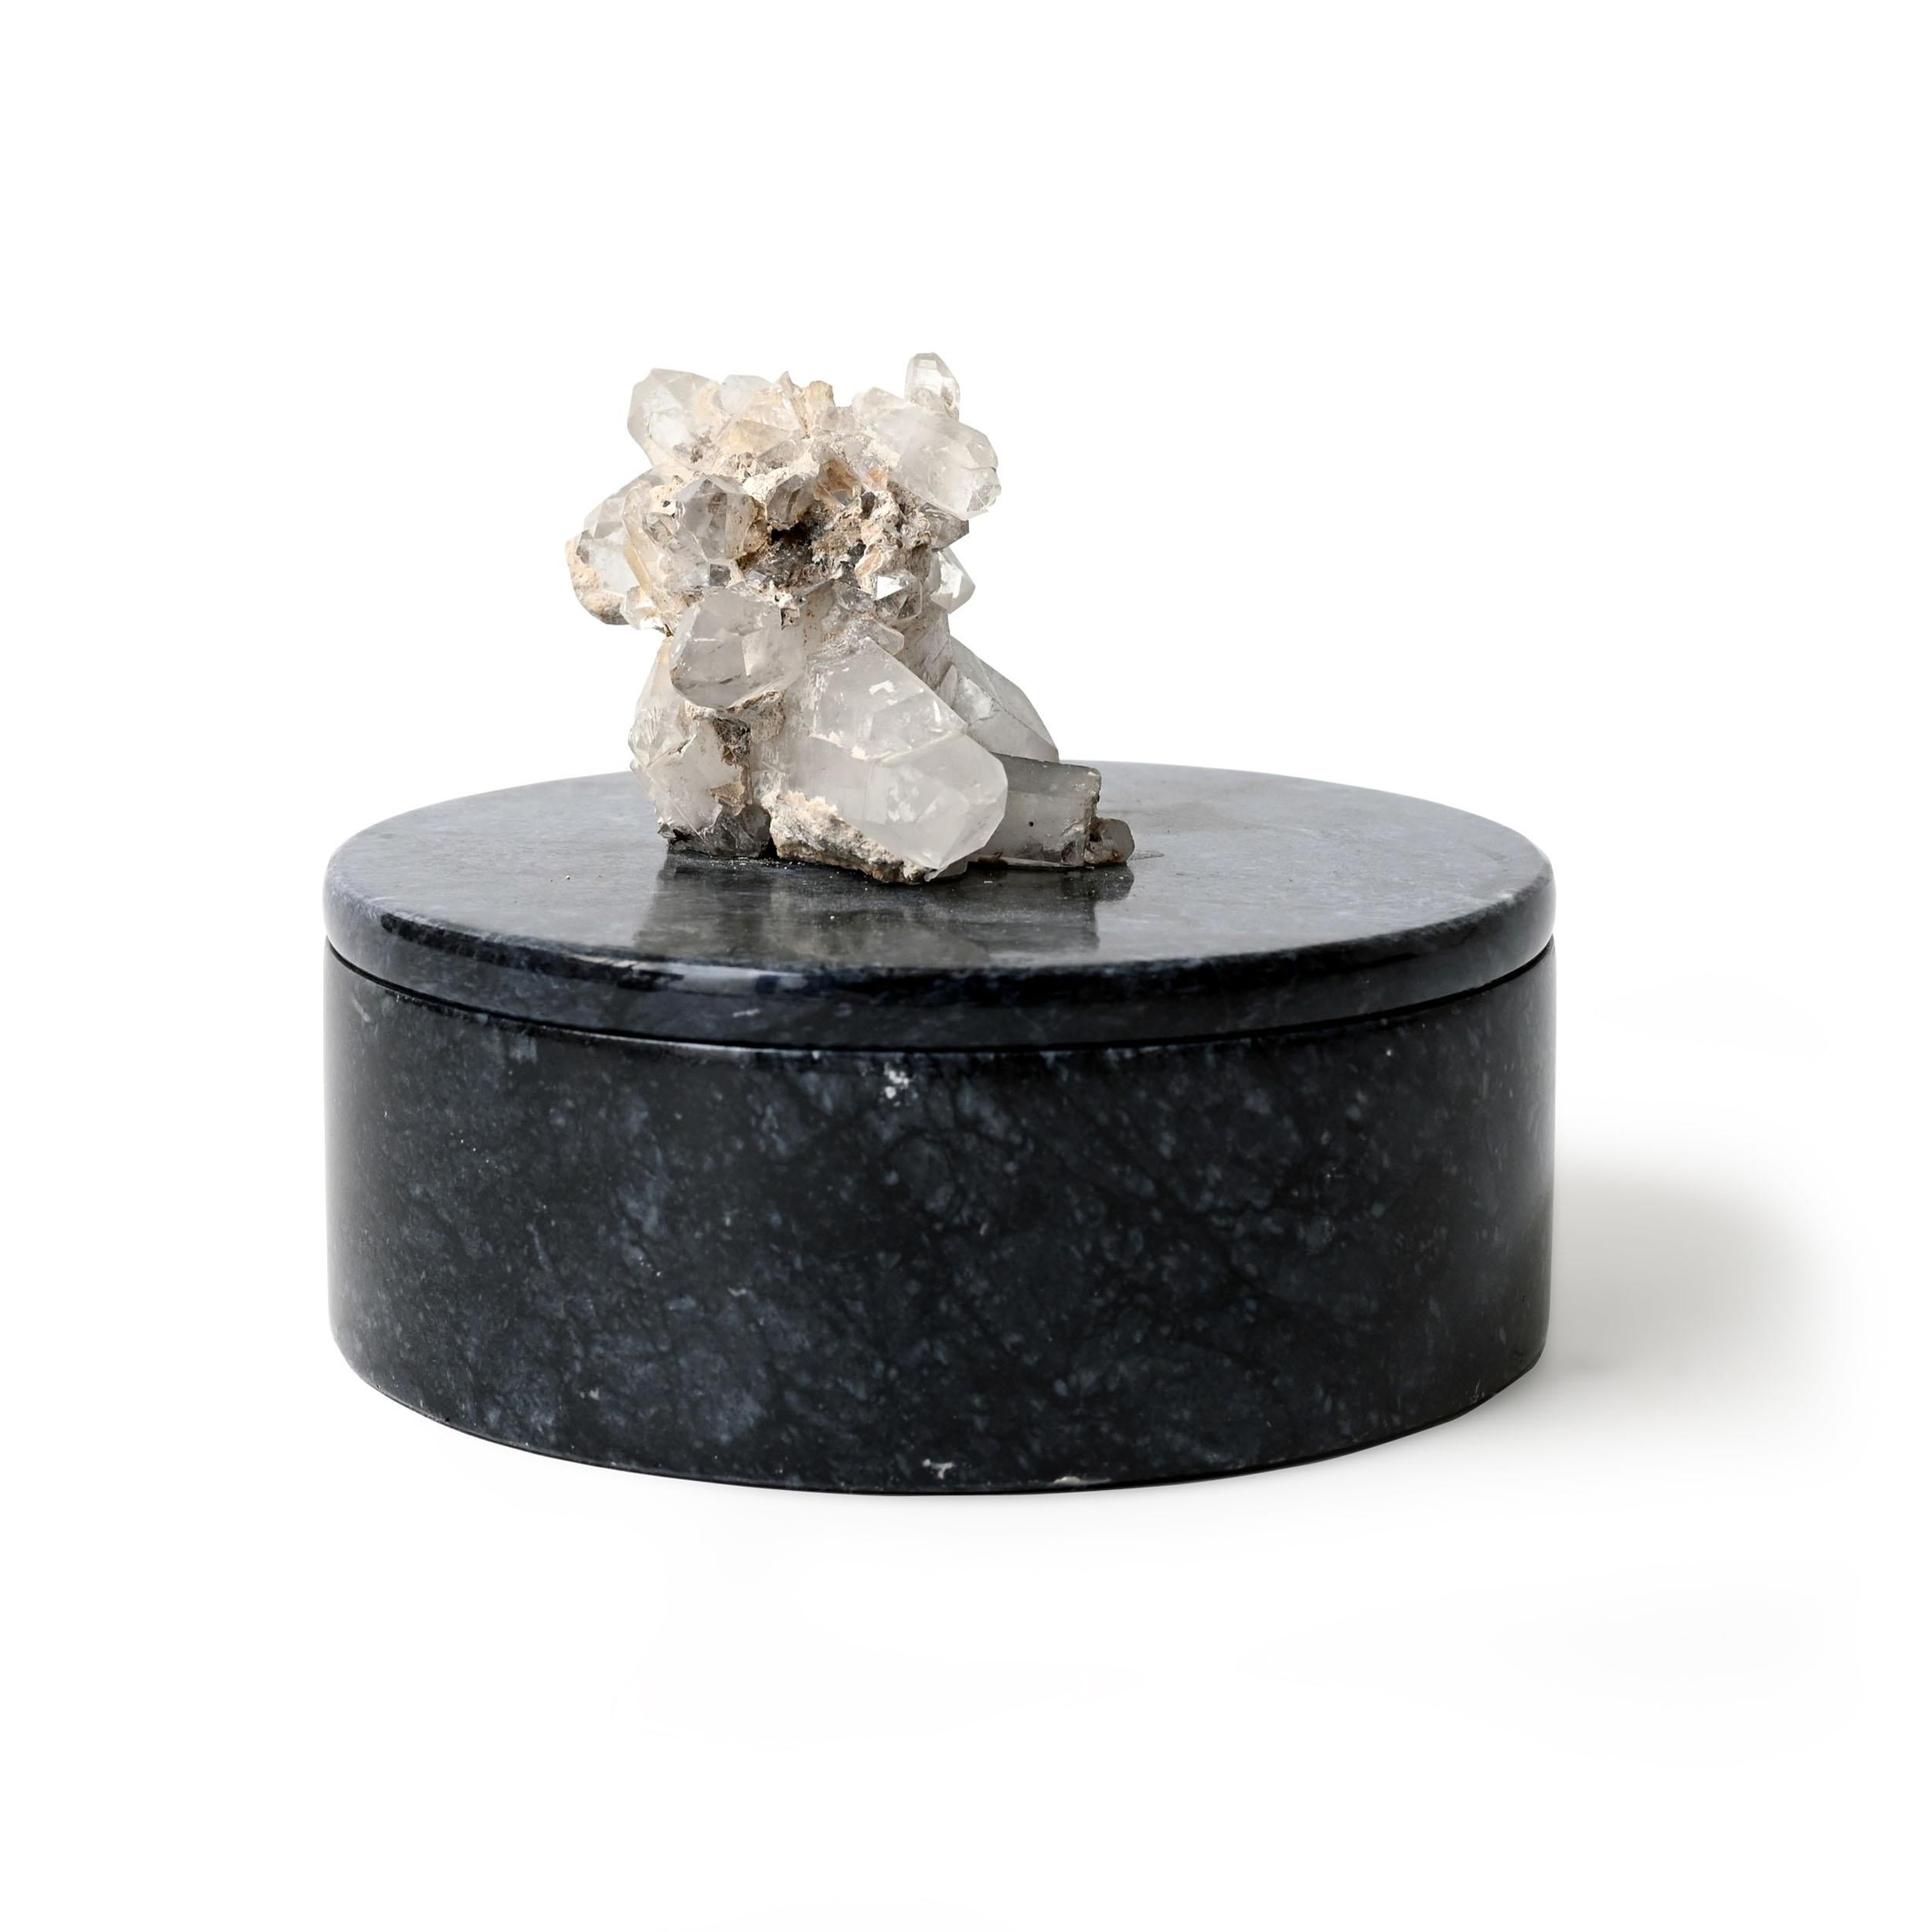 Invisible Cities Box III by Studio Lel
Dimensions: D 13 x H 8 cm
Materials: Crystal quartz, marble.

These are handmade from semiprecious stone and marble in a small artisanal workshop. Please note that variations and slight imperfections are part